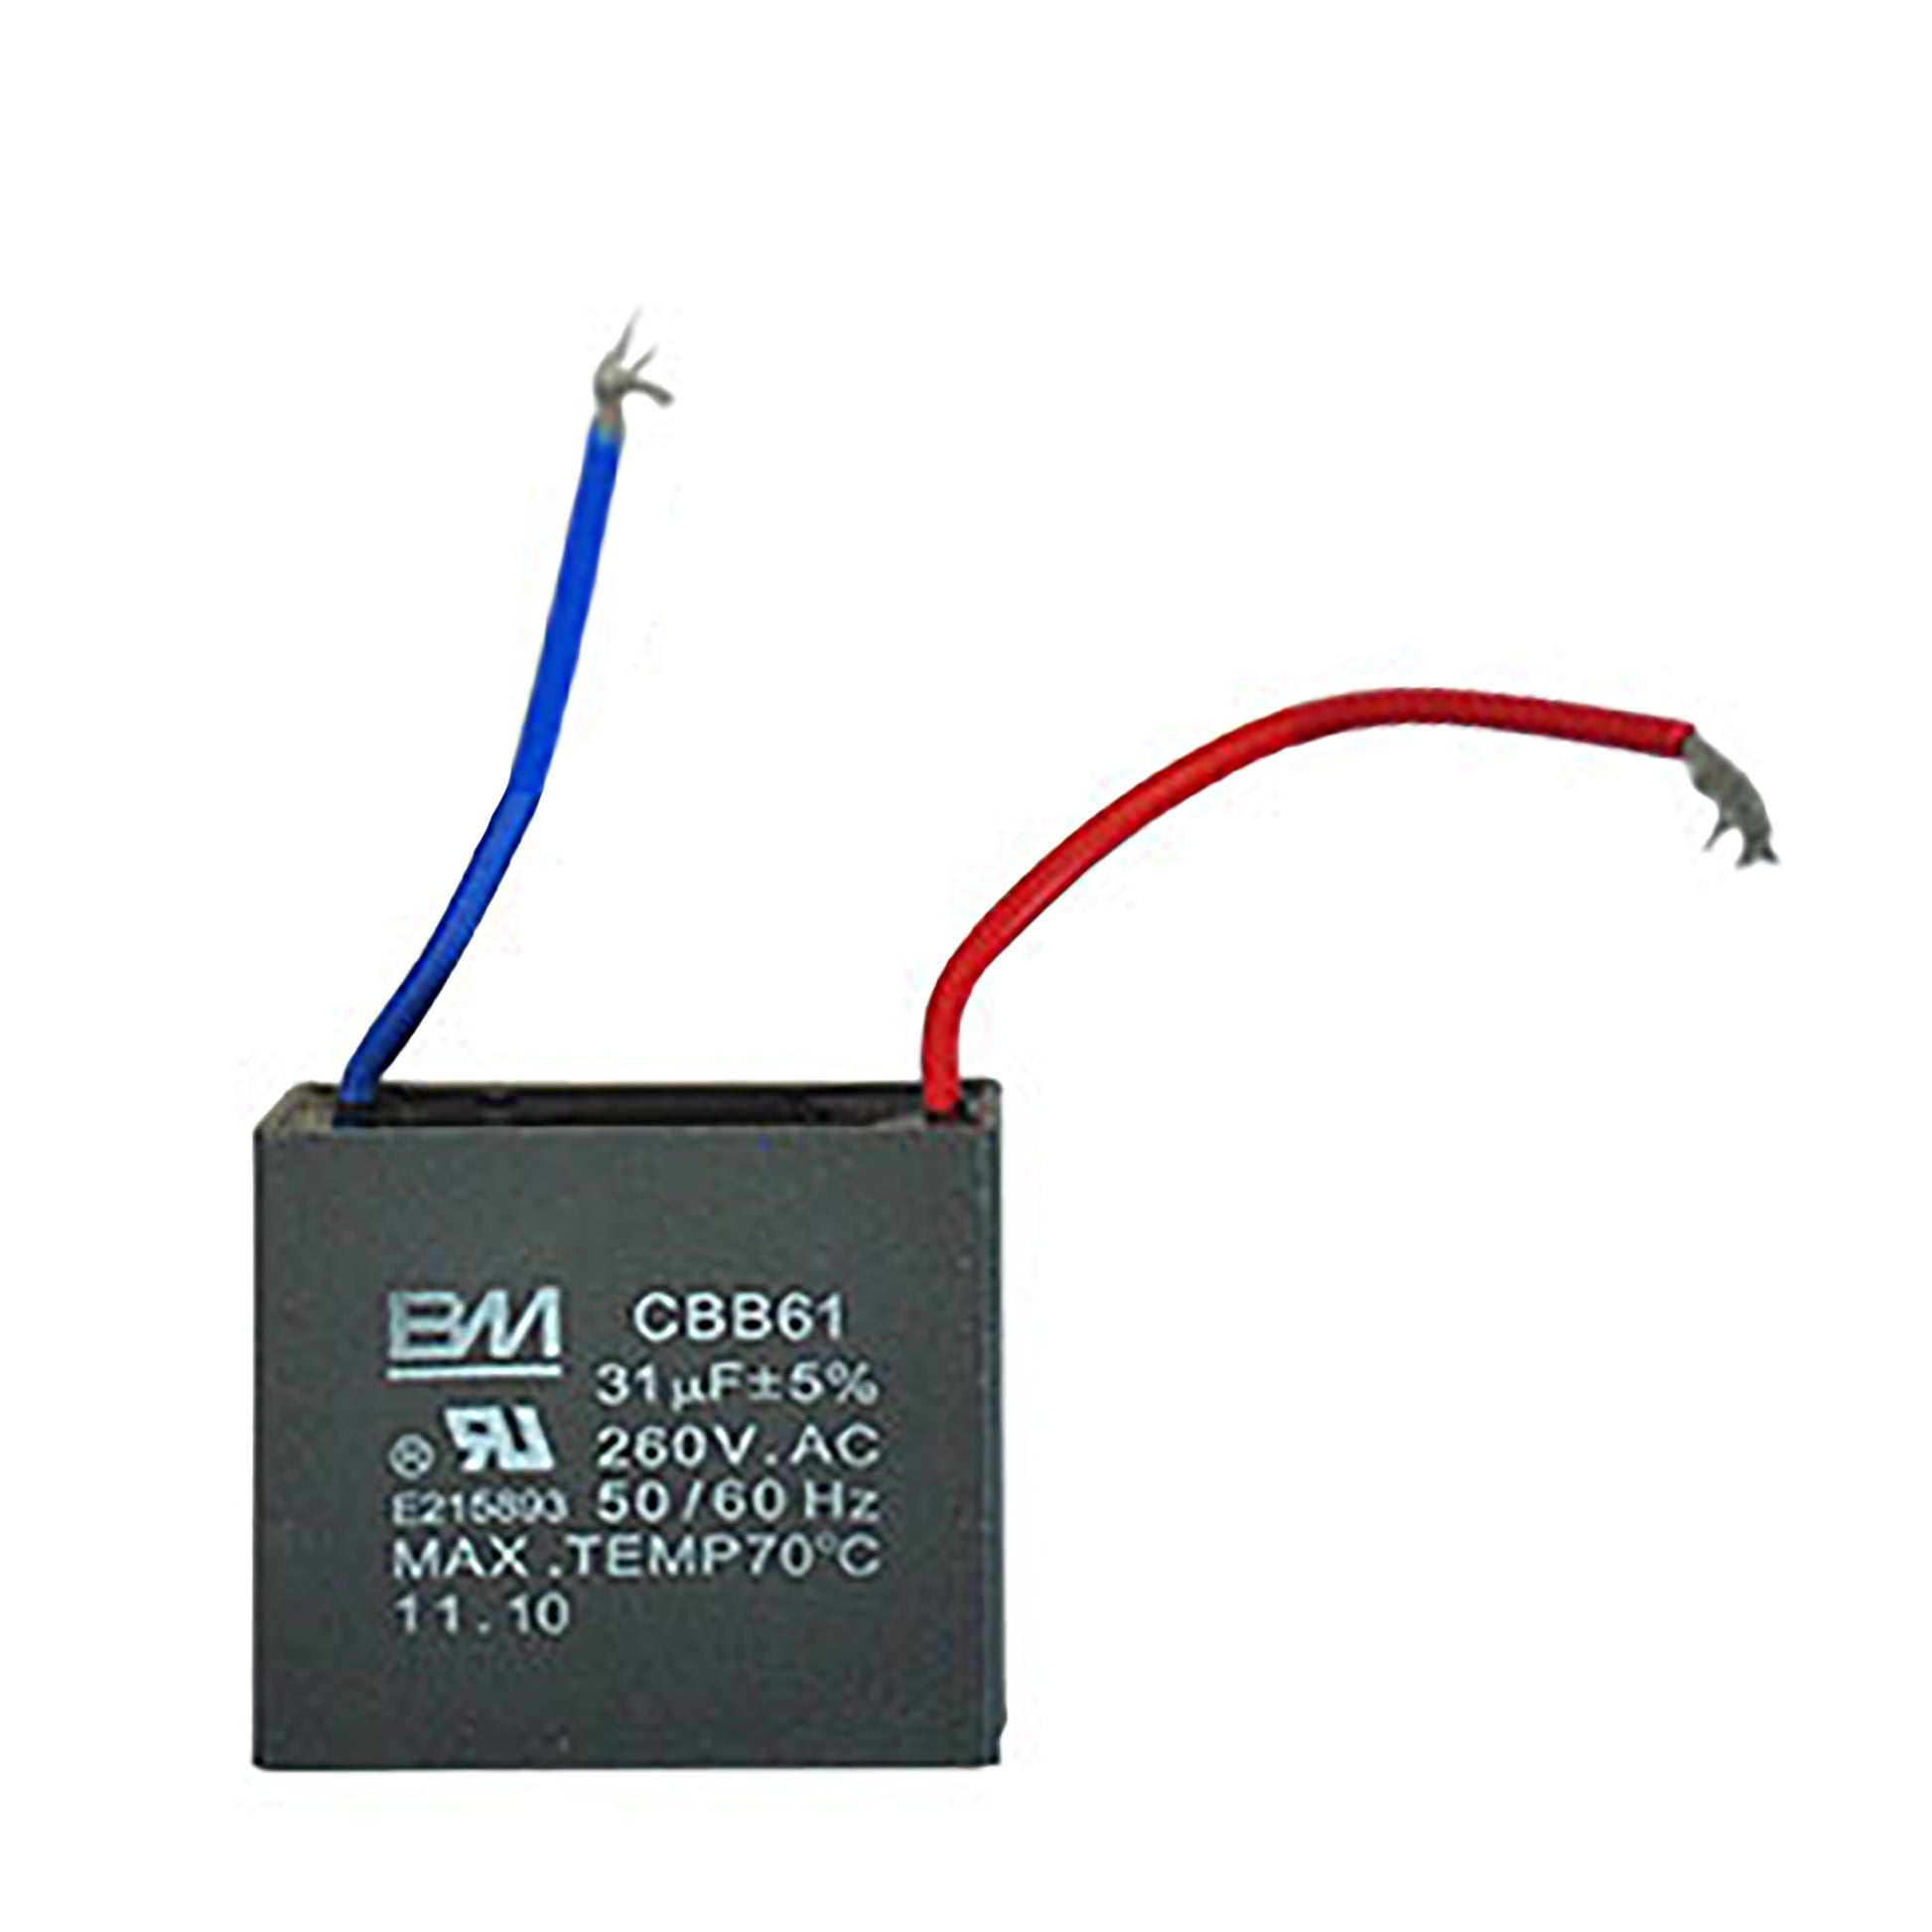 Capacitor for BR-15 Inflatable Blower